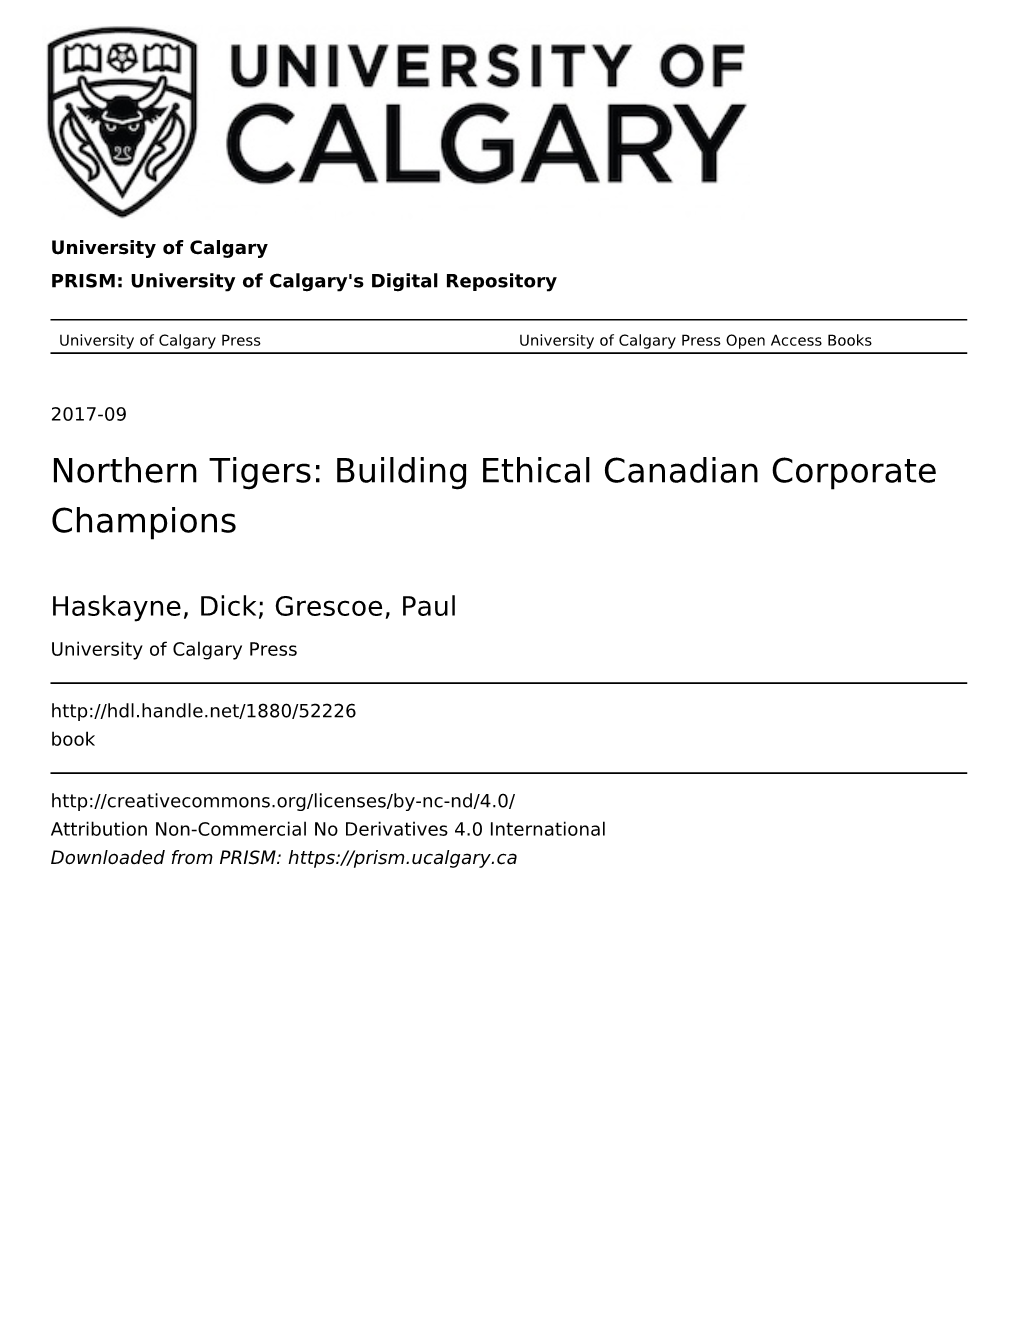 Northern Tigers: Building Ethical Canadian Corporate Champions